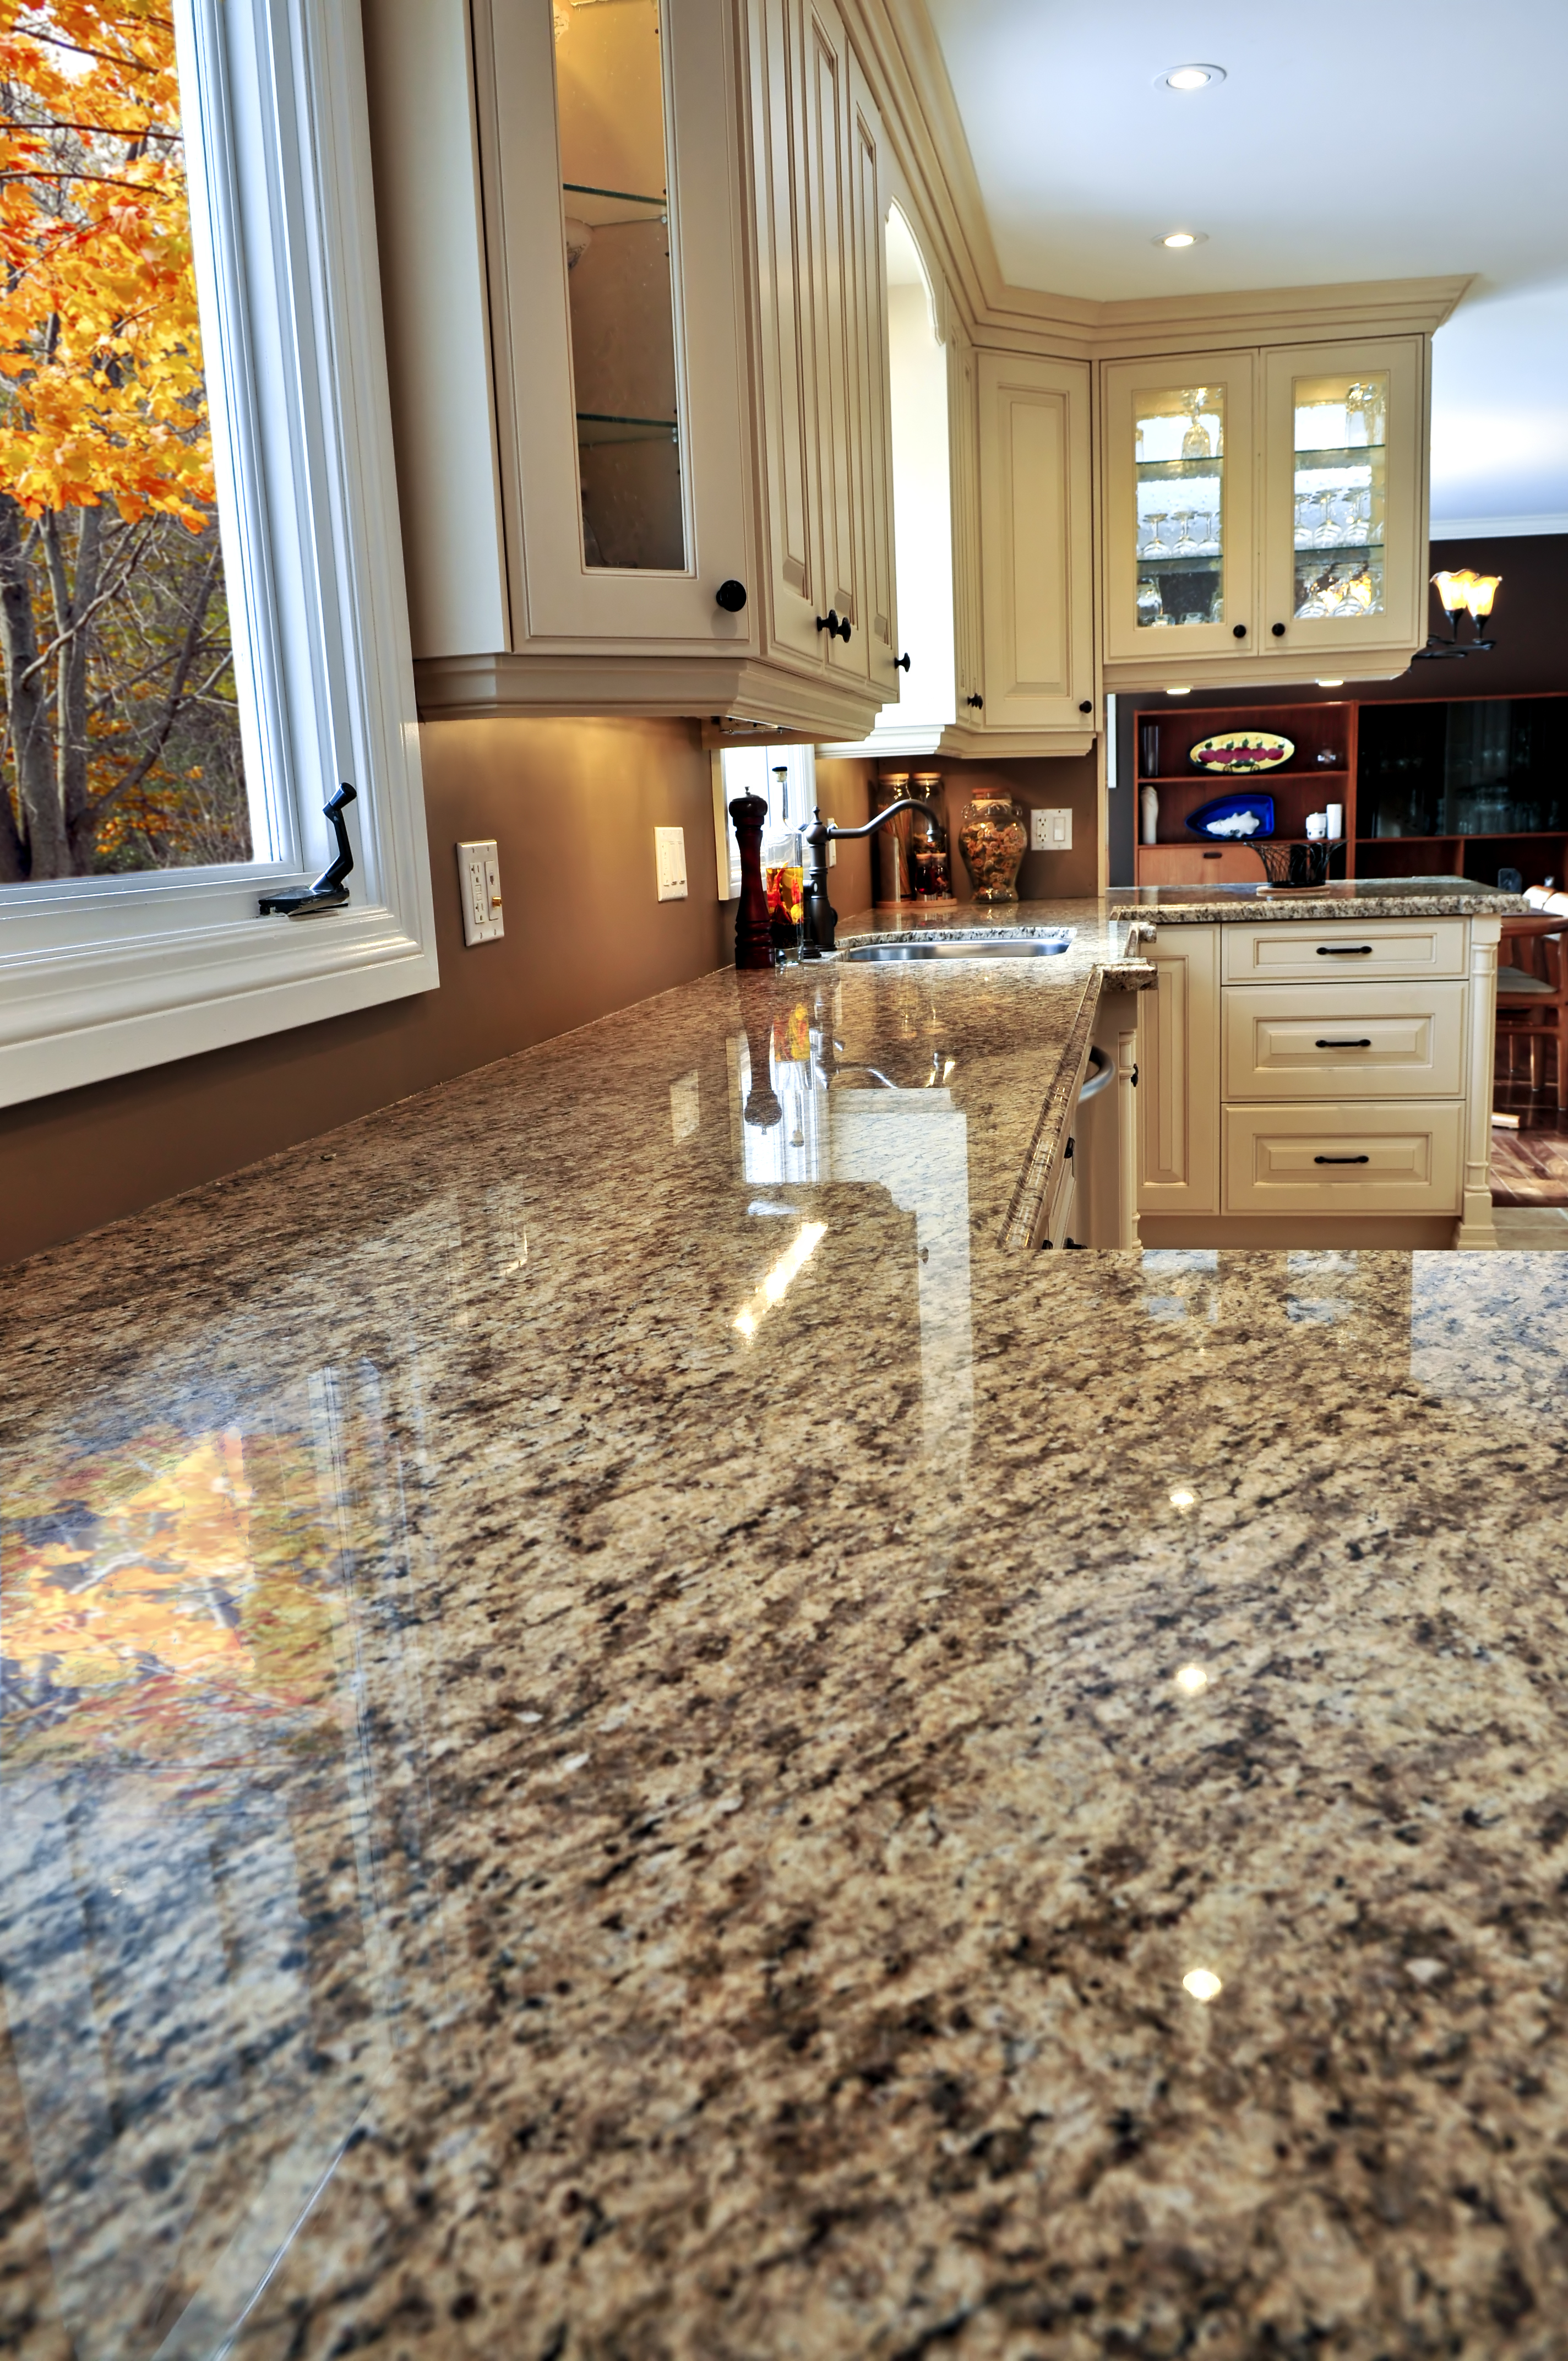 7 Common Kitchen Countertop Problems, How To Separate Two Pieces Of Granite Countertops